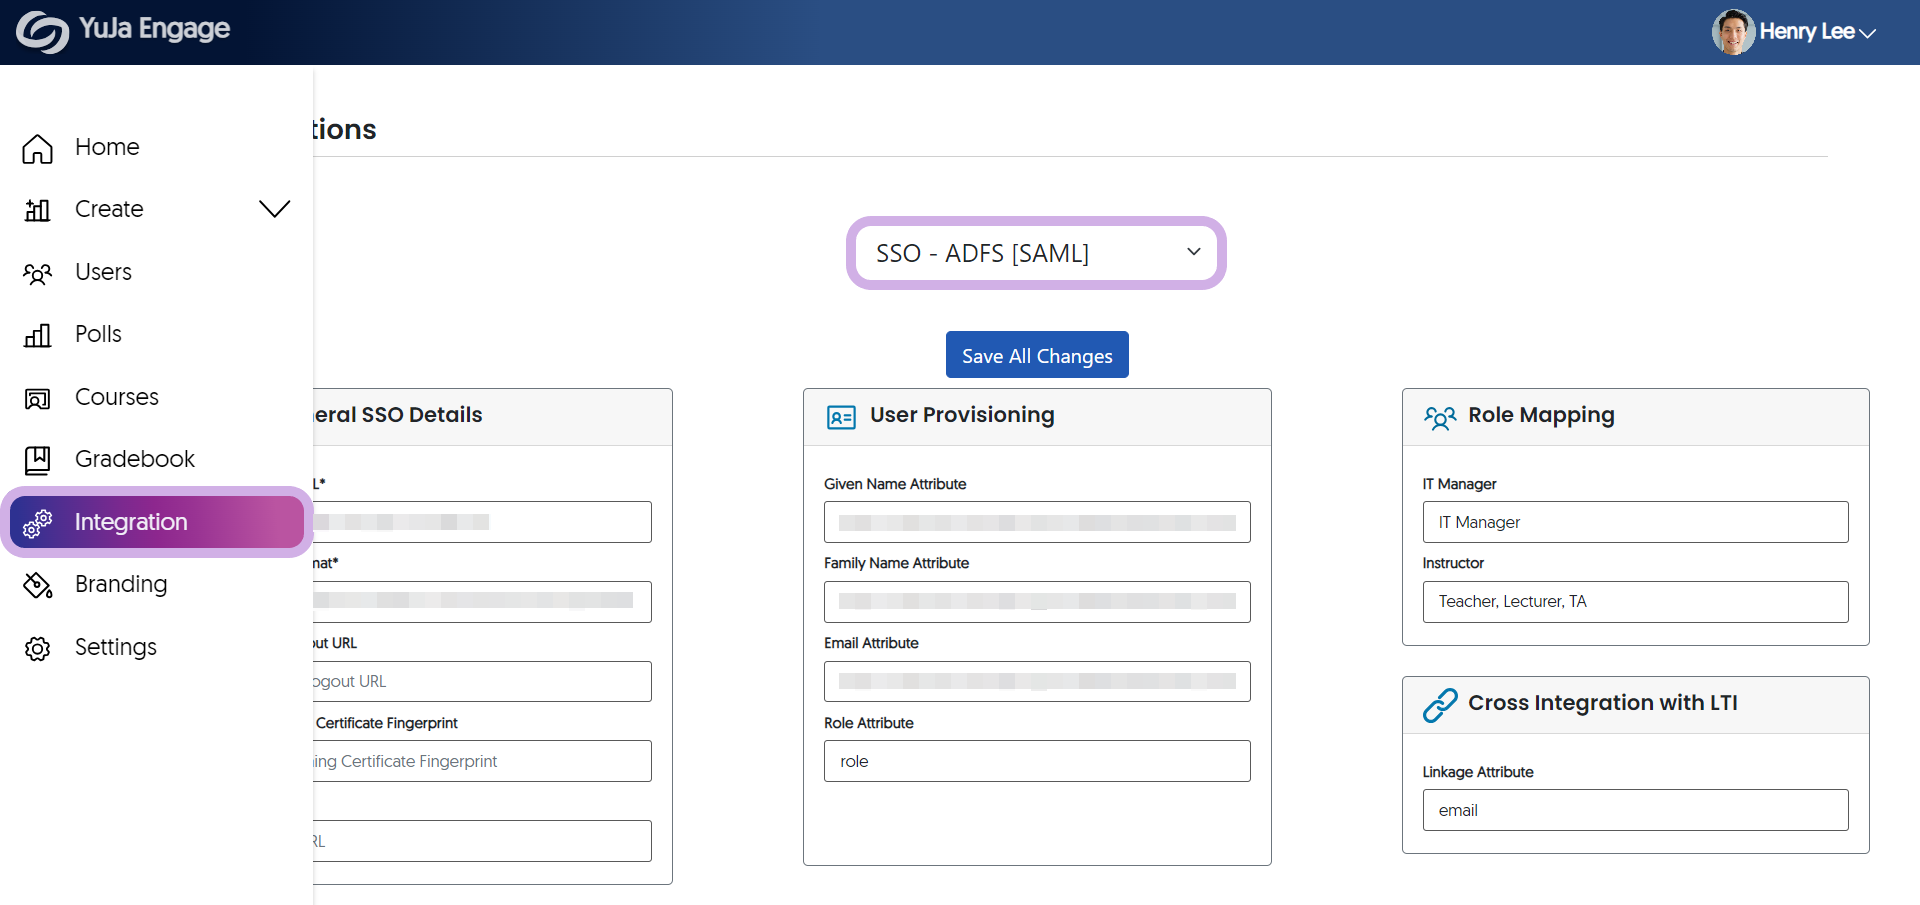 The YuJa Engage SSO ADFS integrations page.